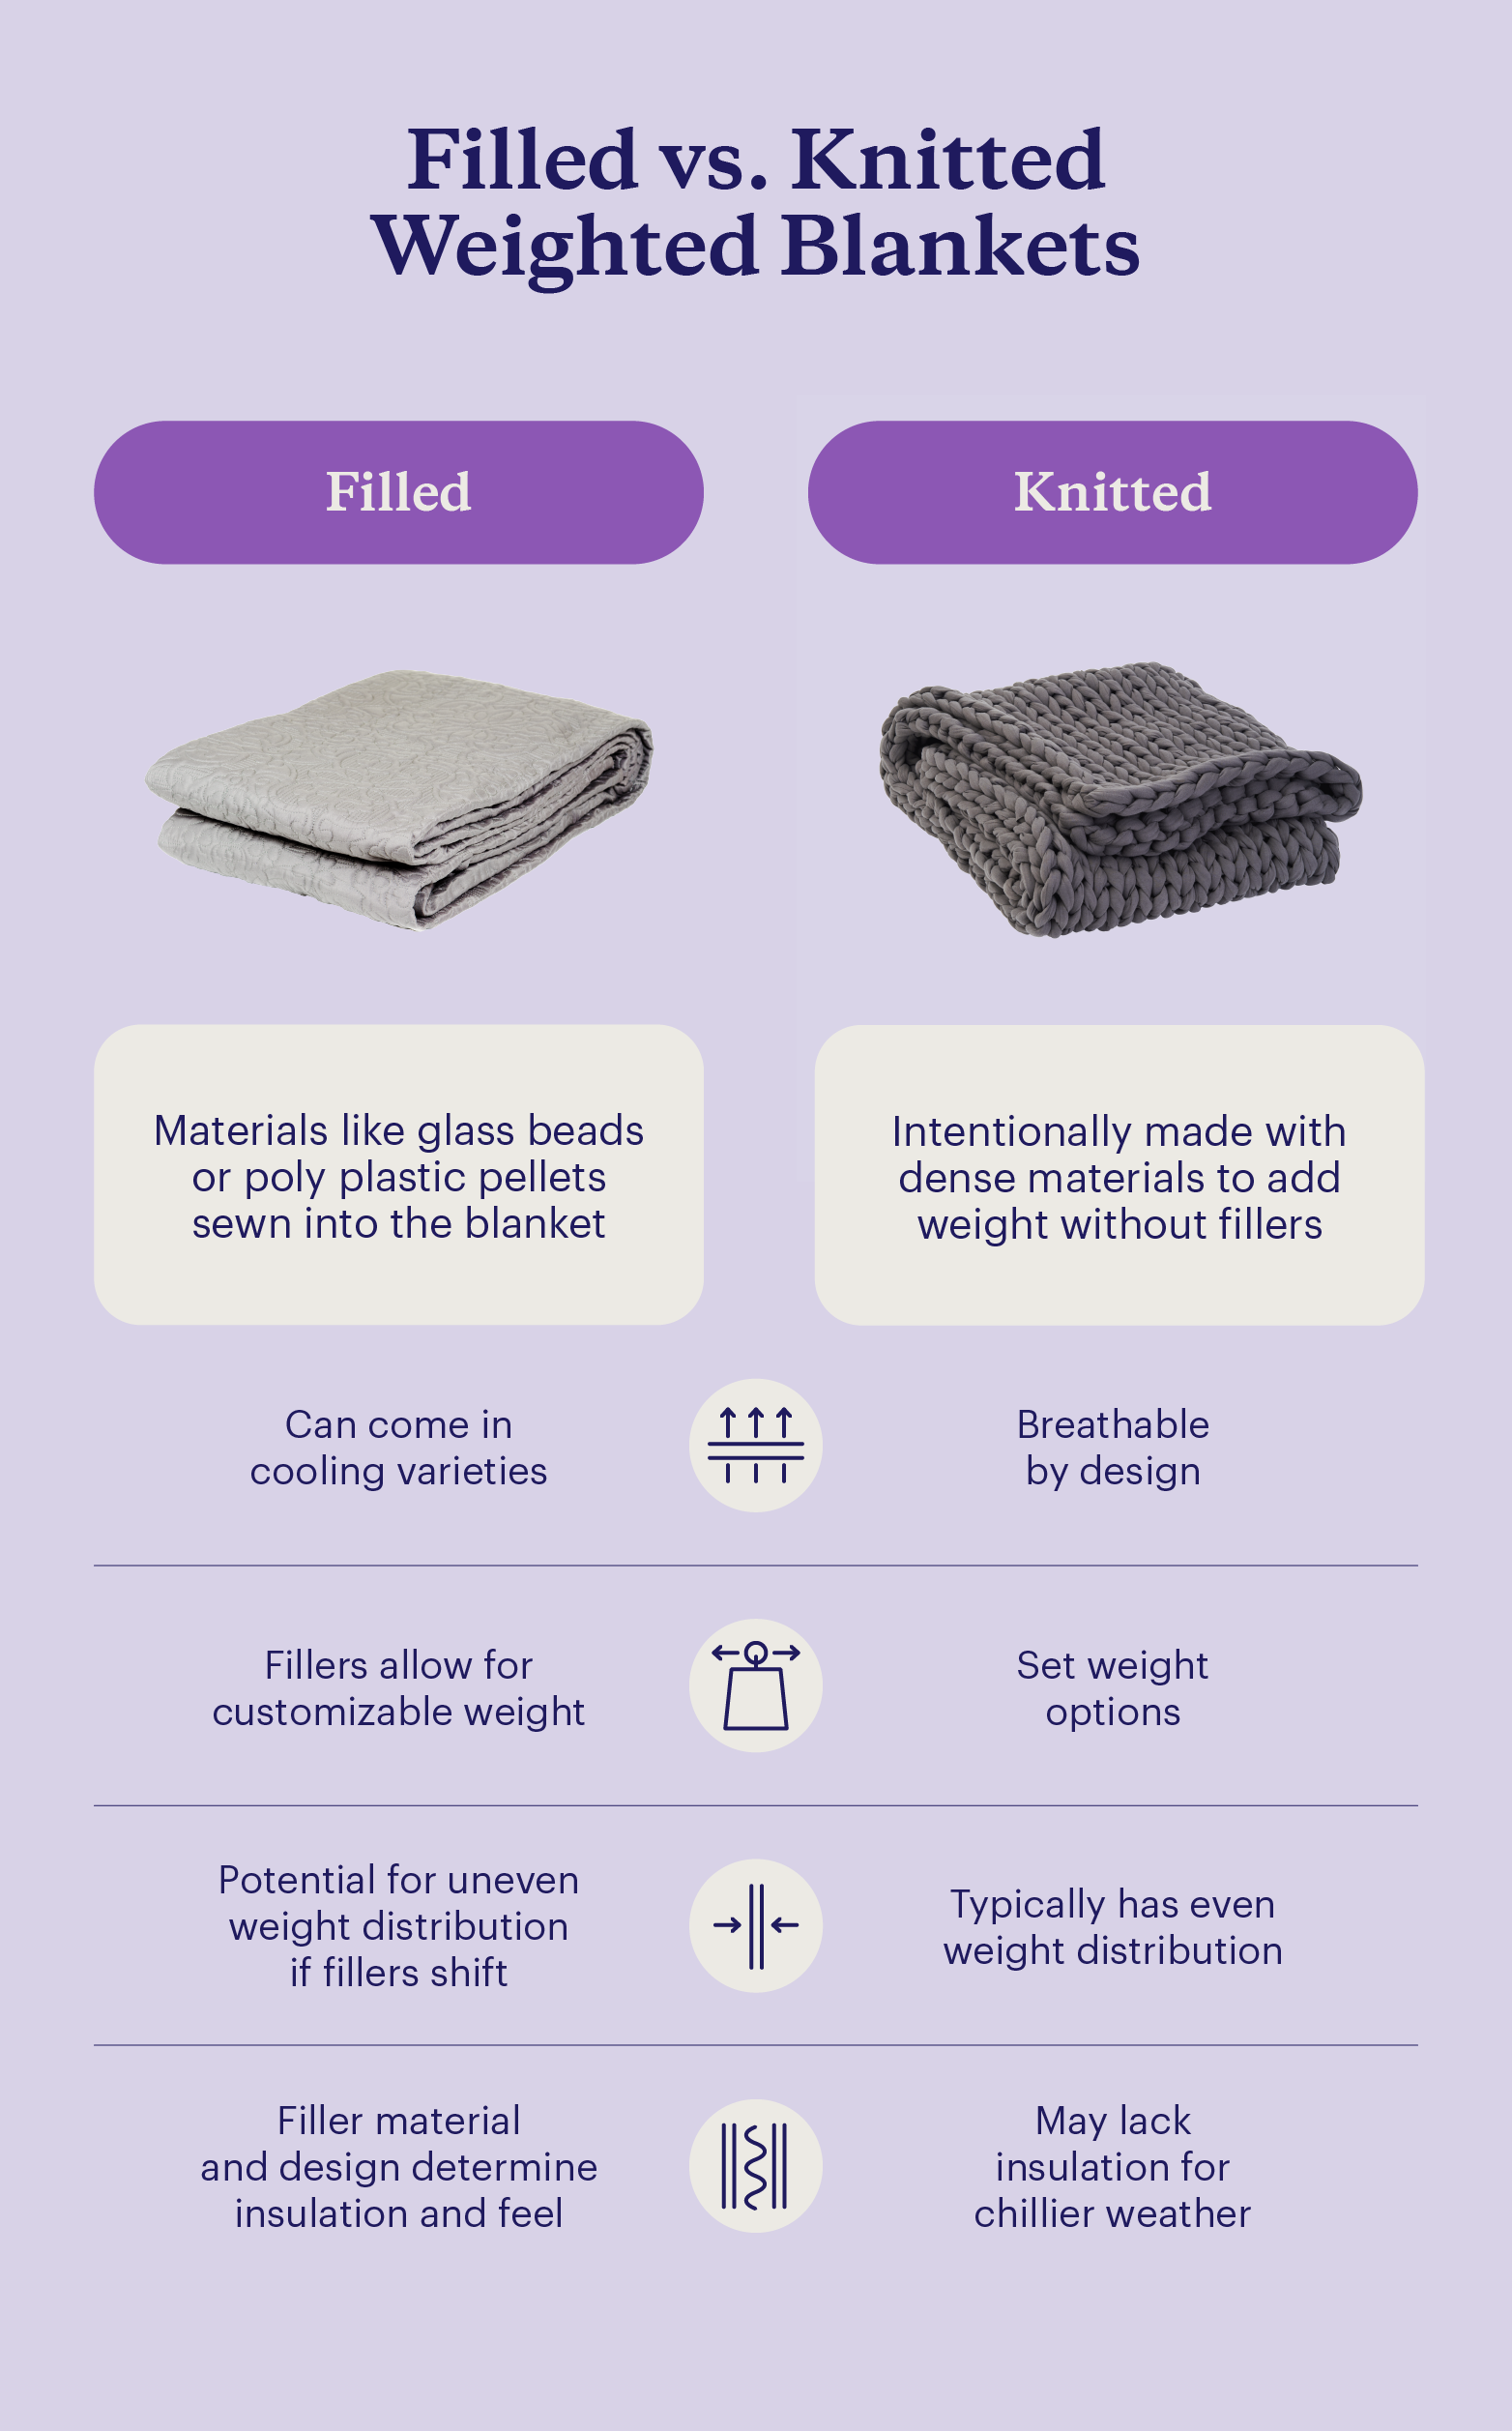 Photos of filled and knitted weighted blankets with comparisons of different qualities.